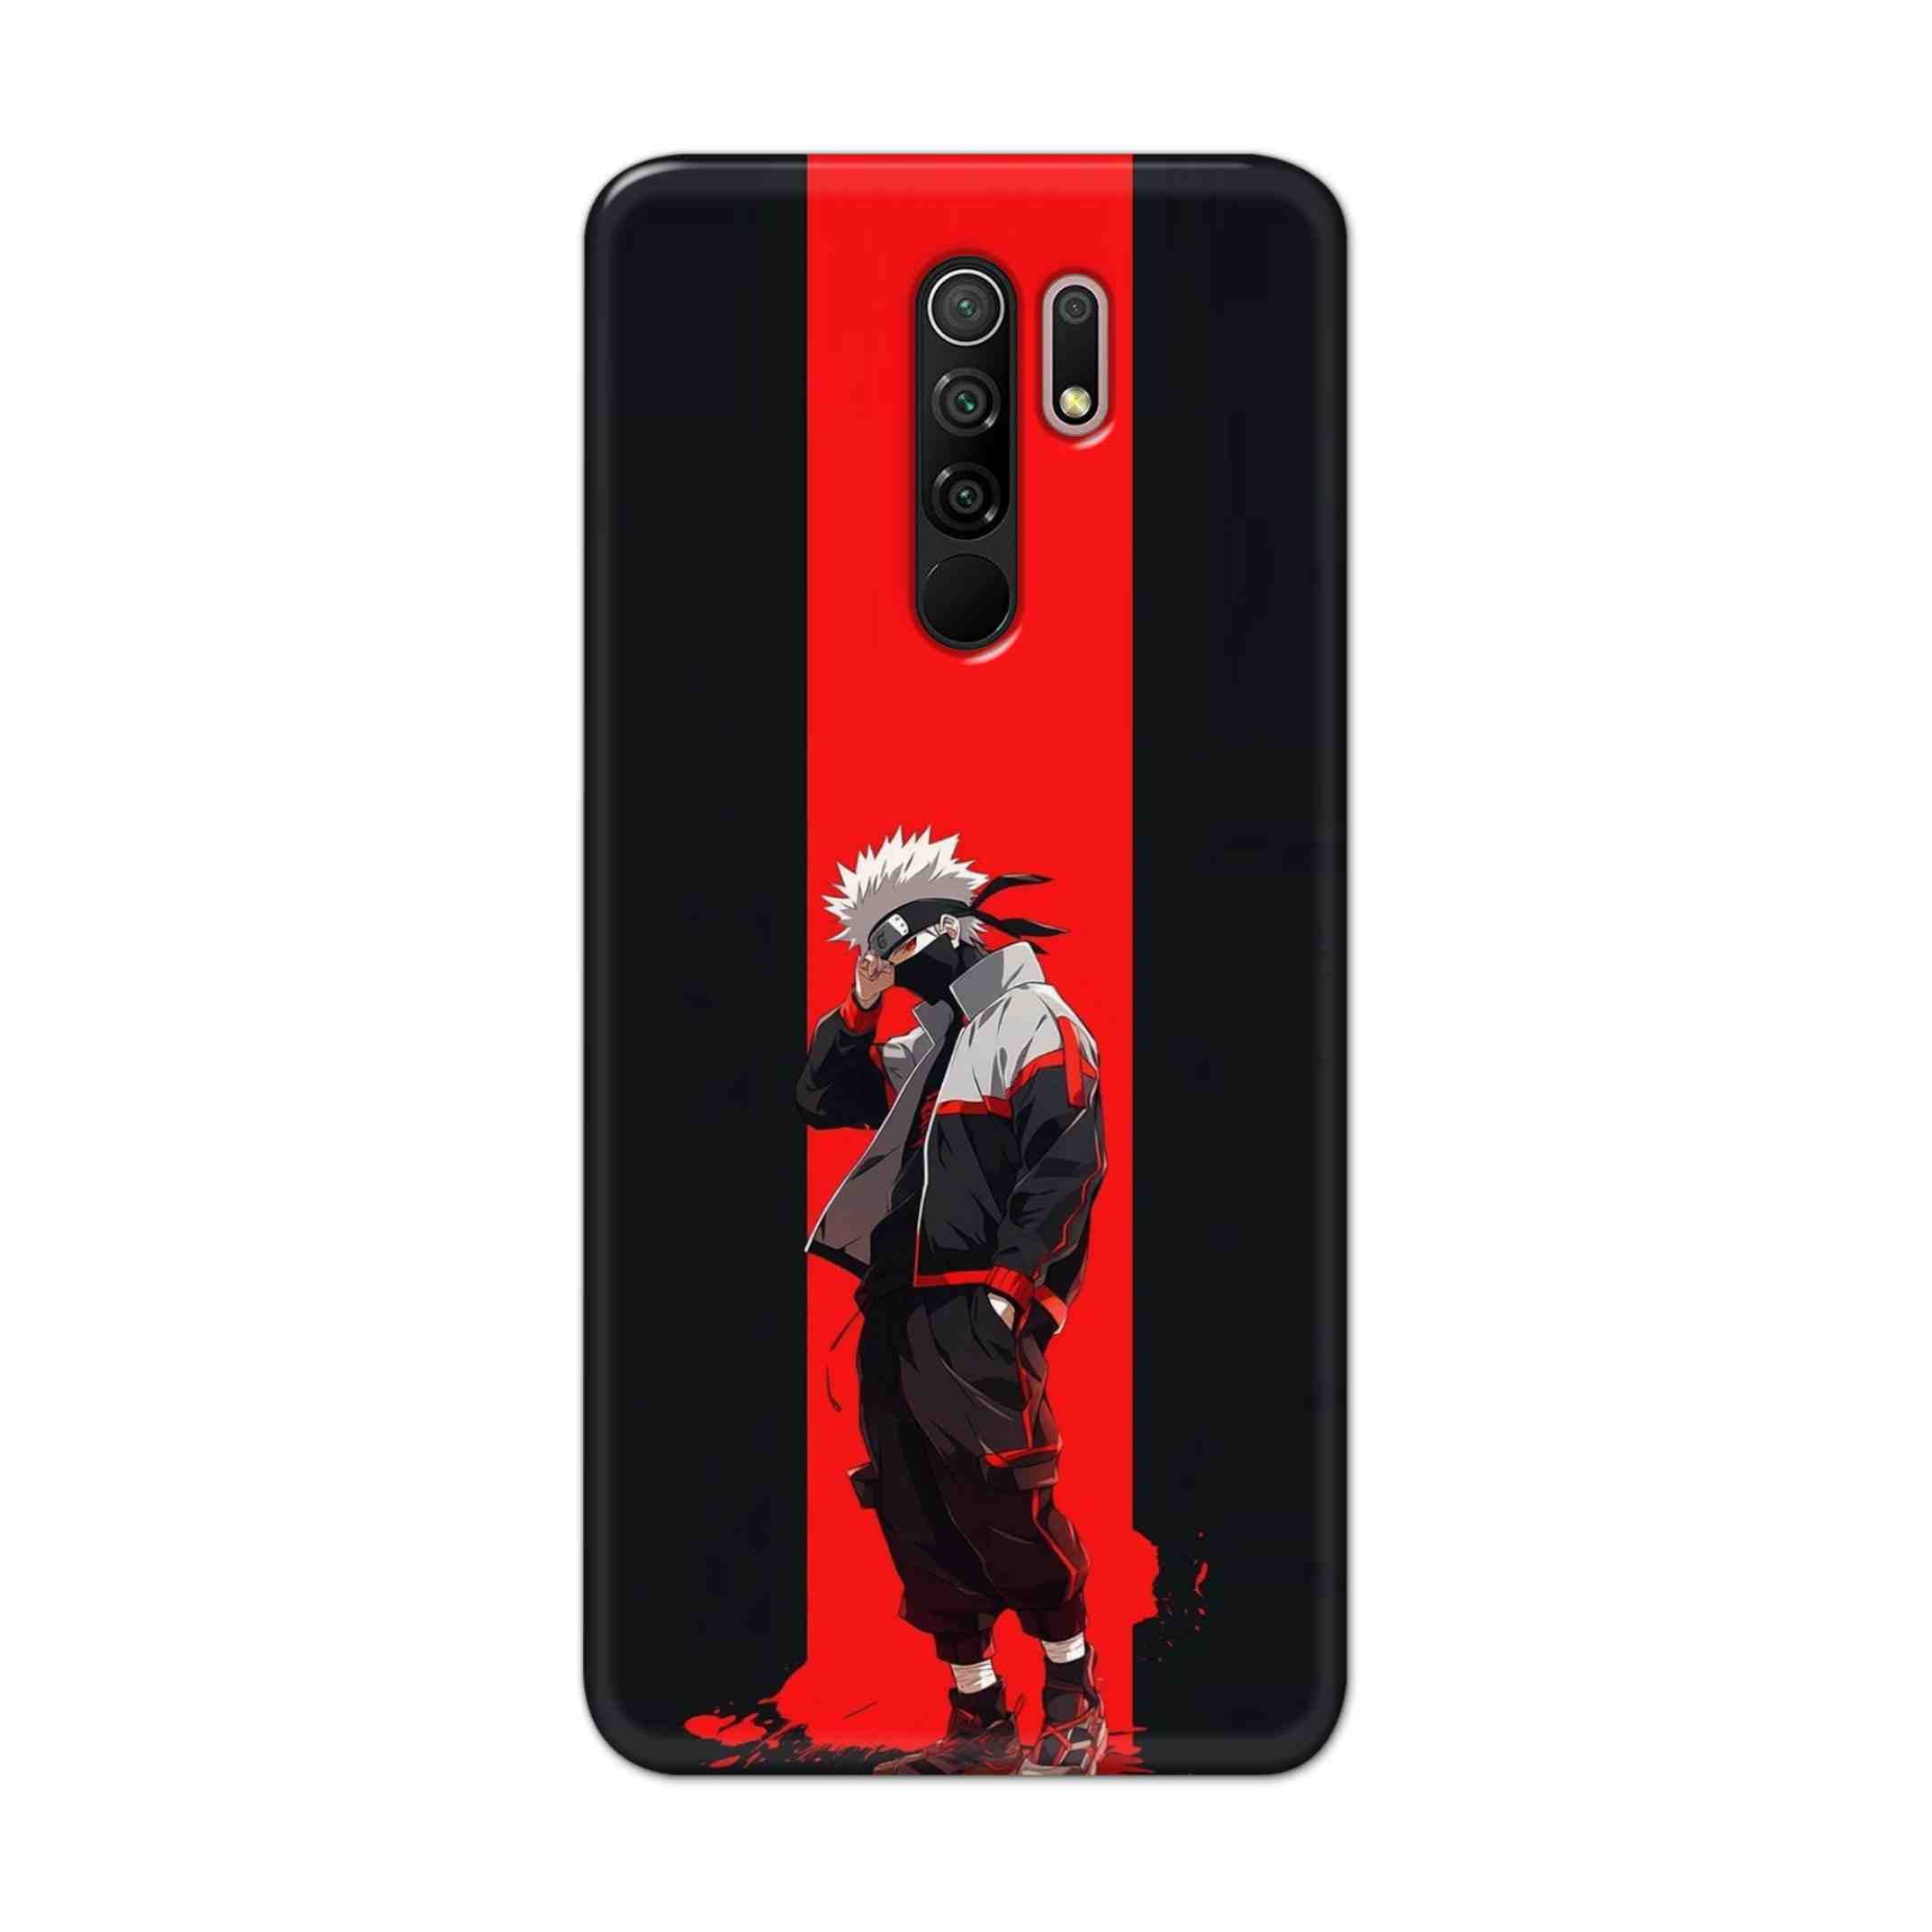 Buy Steins Hard Back Mobile Phone Case Cover For Xiaomi Redmi 9 Prime Online